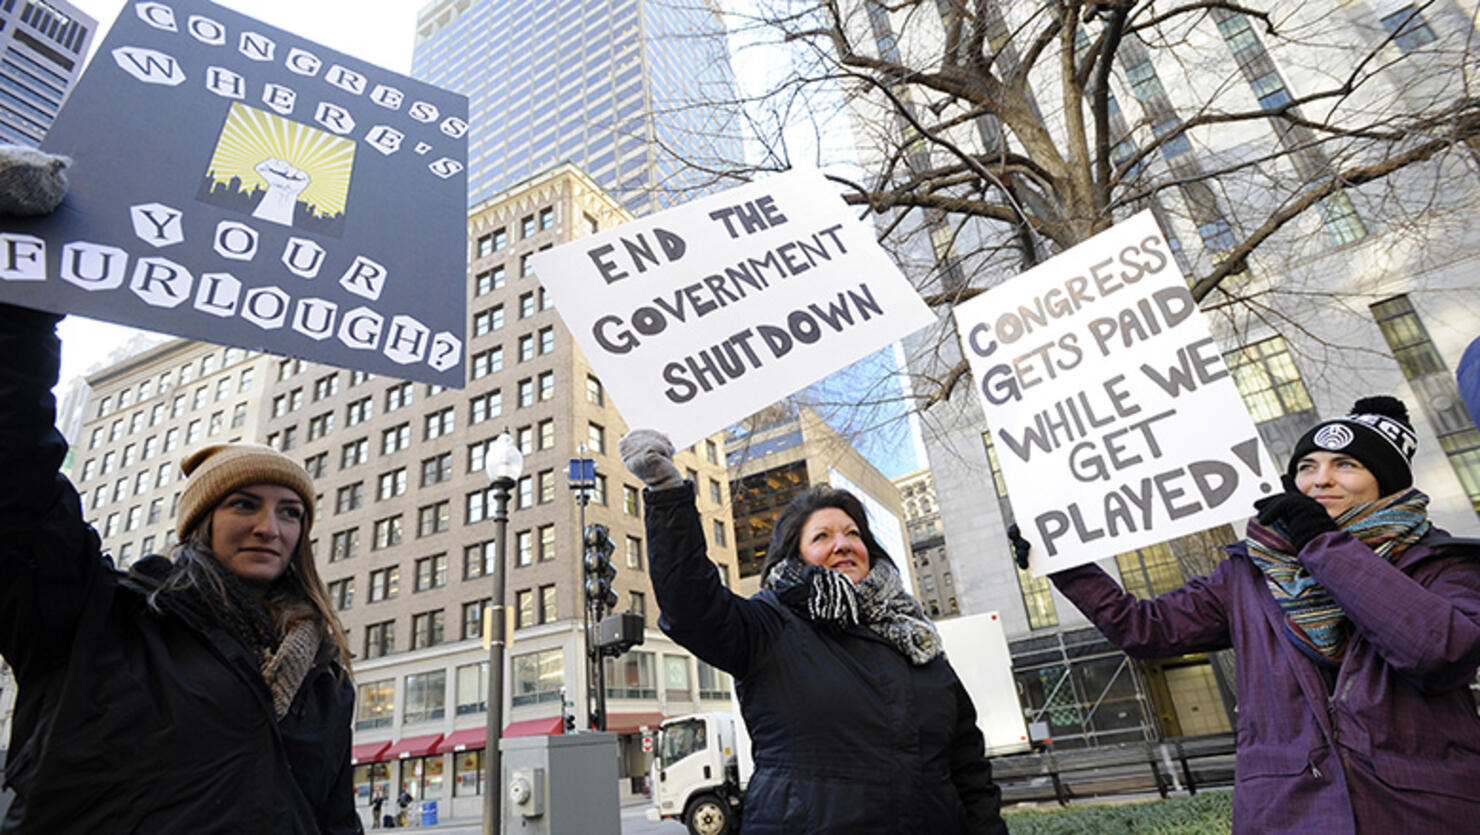 EPA employee Rosanne Sawaya-Obrien (C) holds her sign calling for an end to the government shutdown during a rally and protest by government workers and concerned citizens at Post Office Square near the Federal building, headquarters for the EPA and IRS in Boston